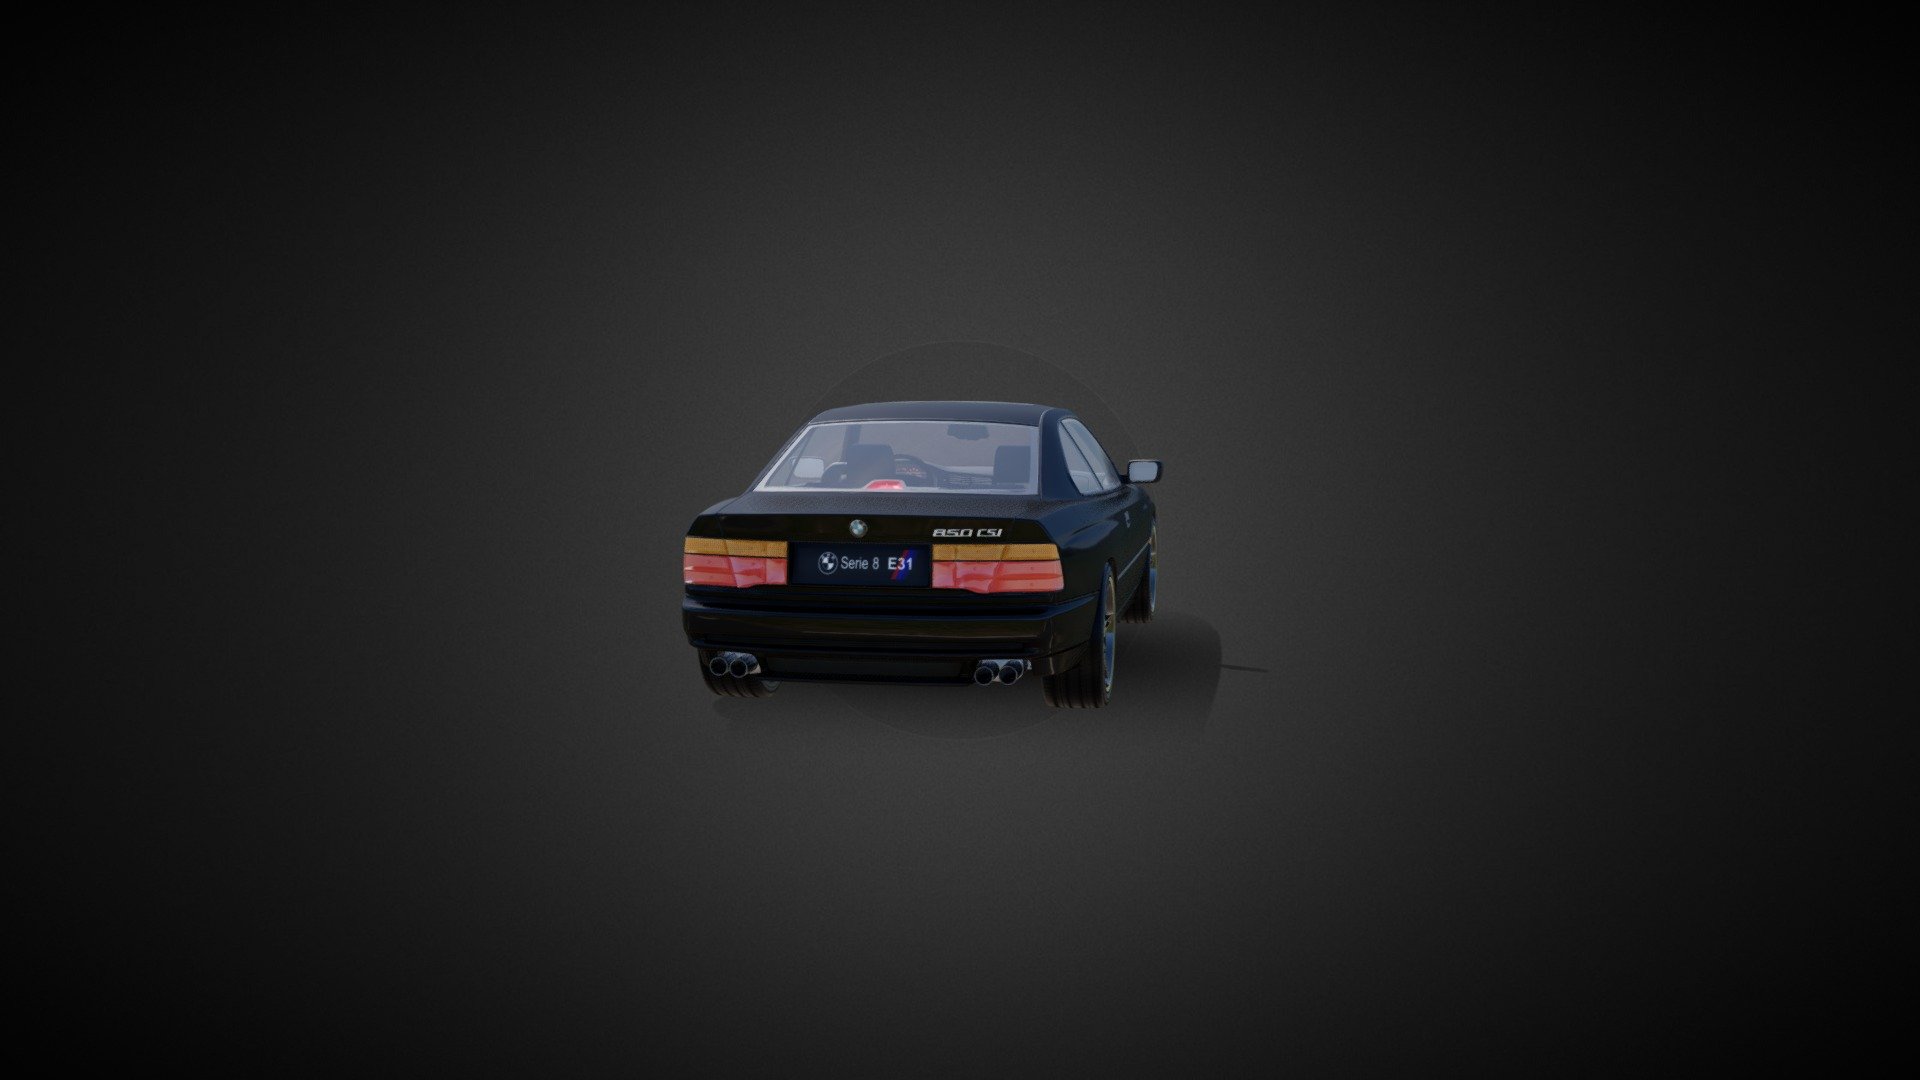 BMW 8 serie E31, 850 CSI
I changed the original rims to the rims from the M5 E39 3d model